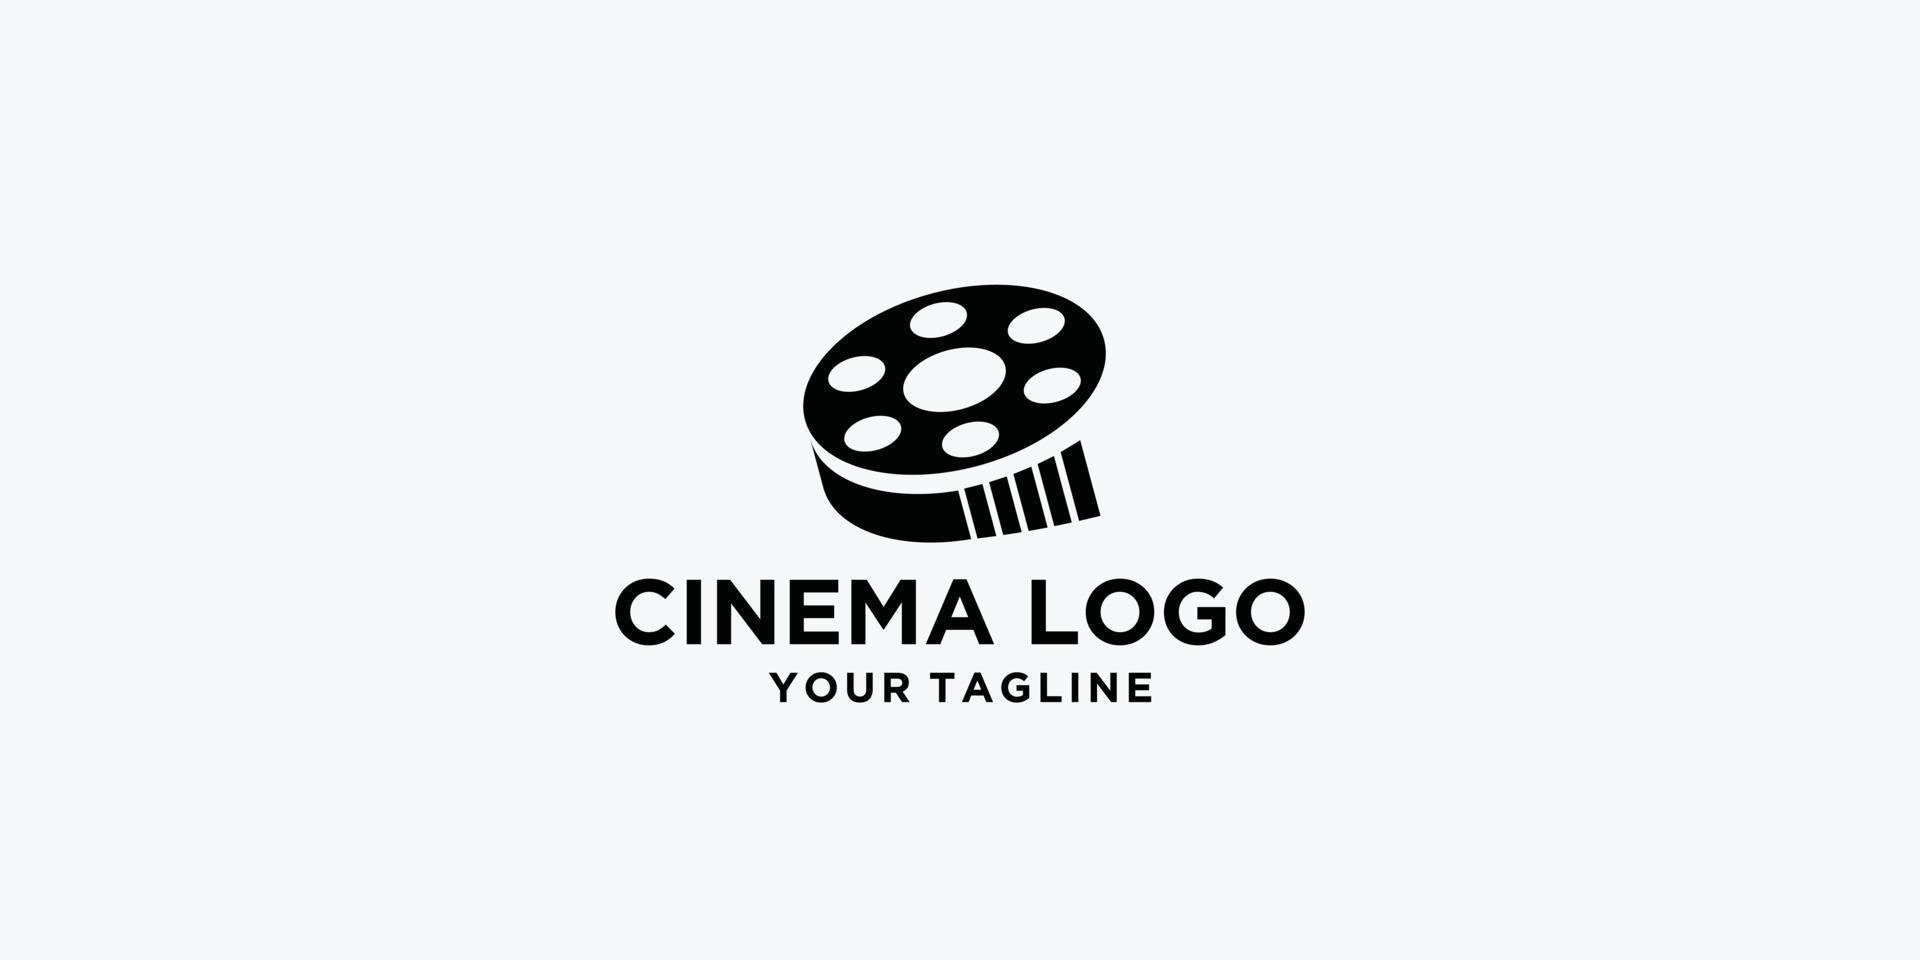 abstract cinema logo vector template isolated on white background.